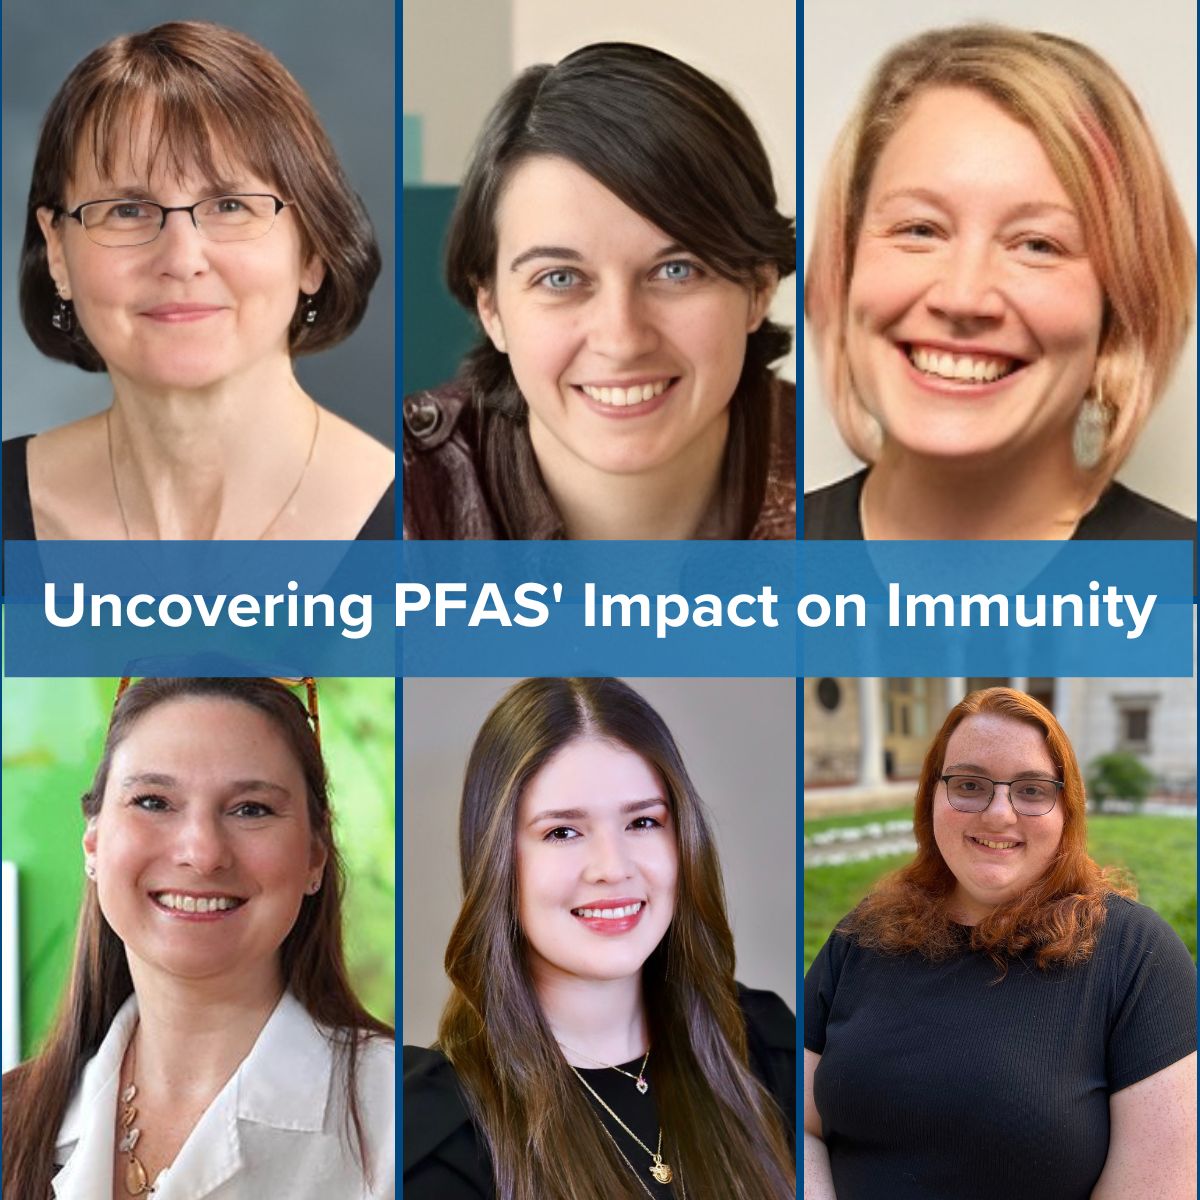 Many are concerned about 'forever chemicals' and their impact on our health. A team led by @BPaigeLawrence and funded by @NIEHS will study how PFAS exposure affects immune function, both early and later in life. #URochesterResearch